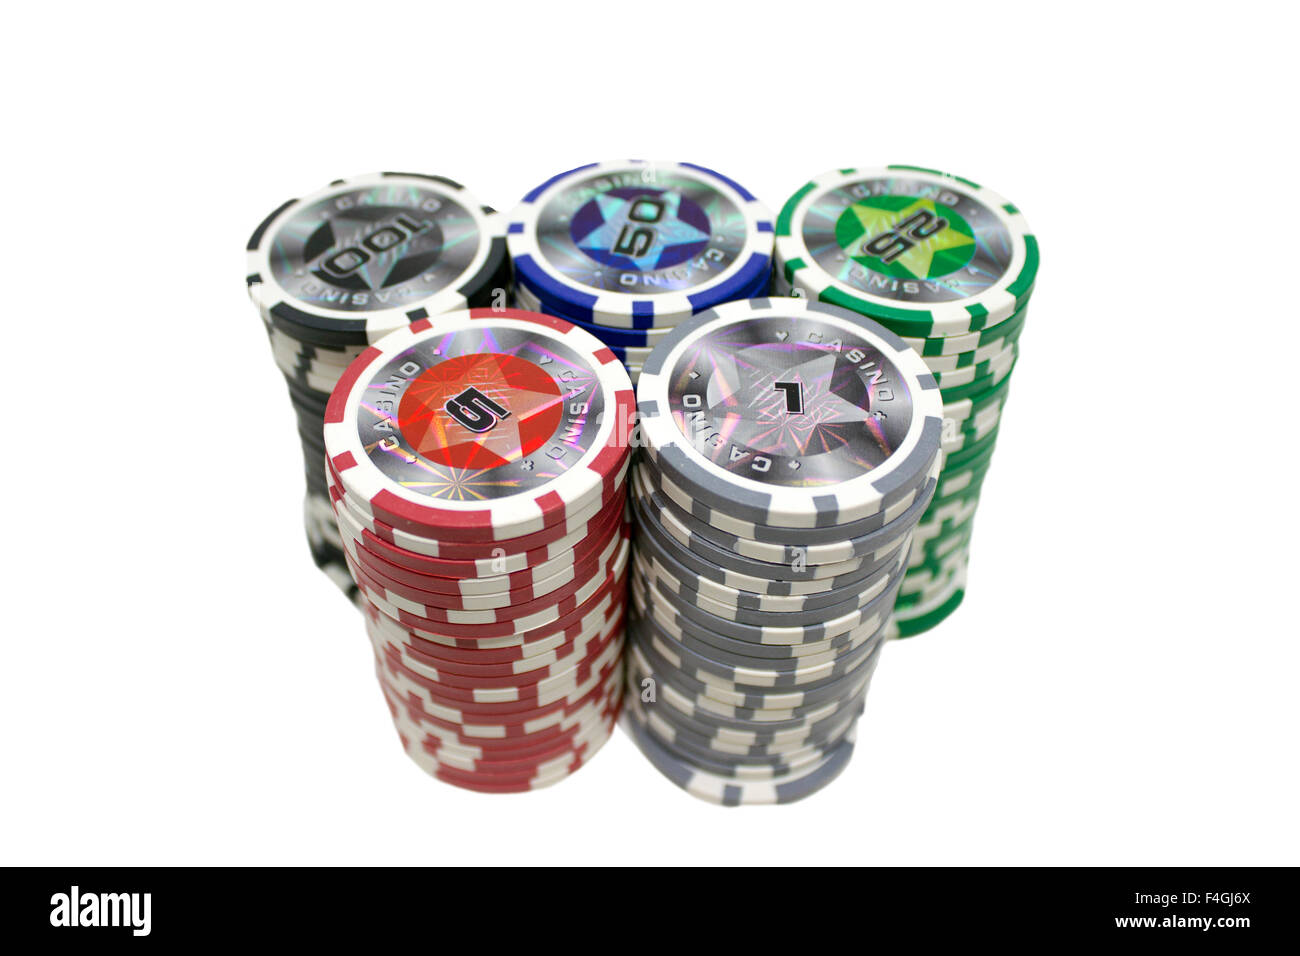 Casino gambling chips stacked and isolated on white background. Stock Photo